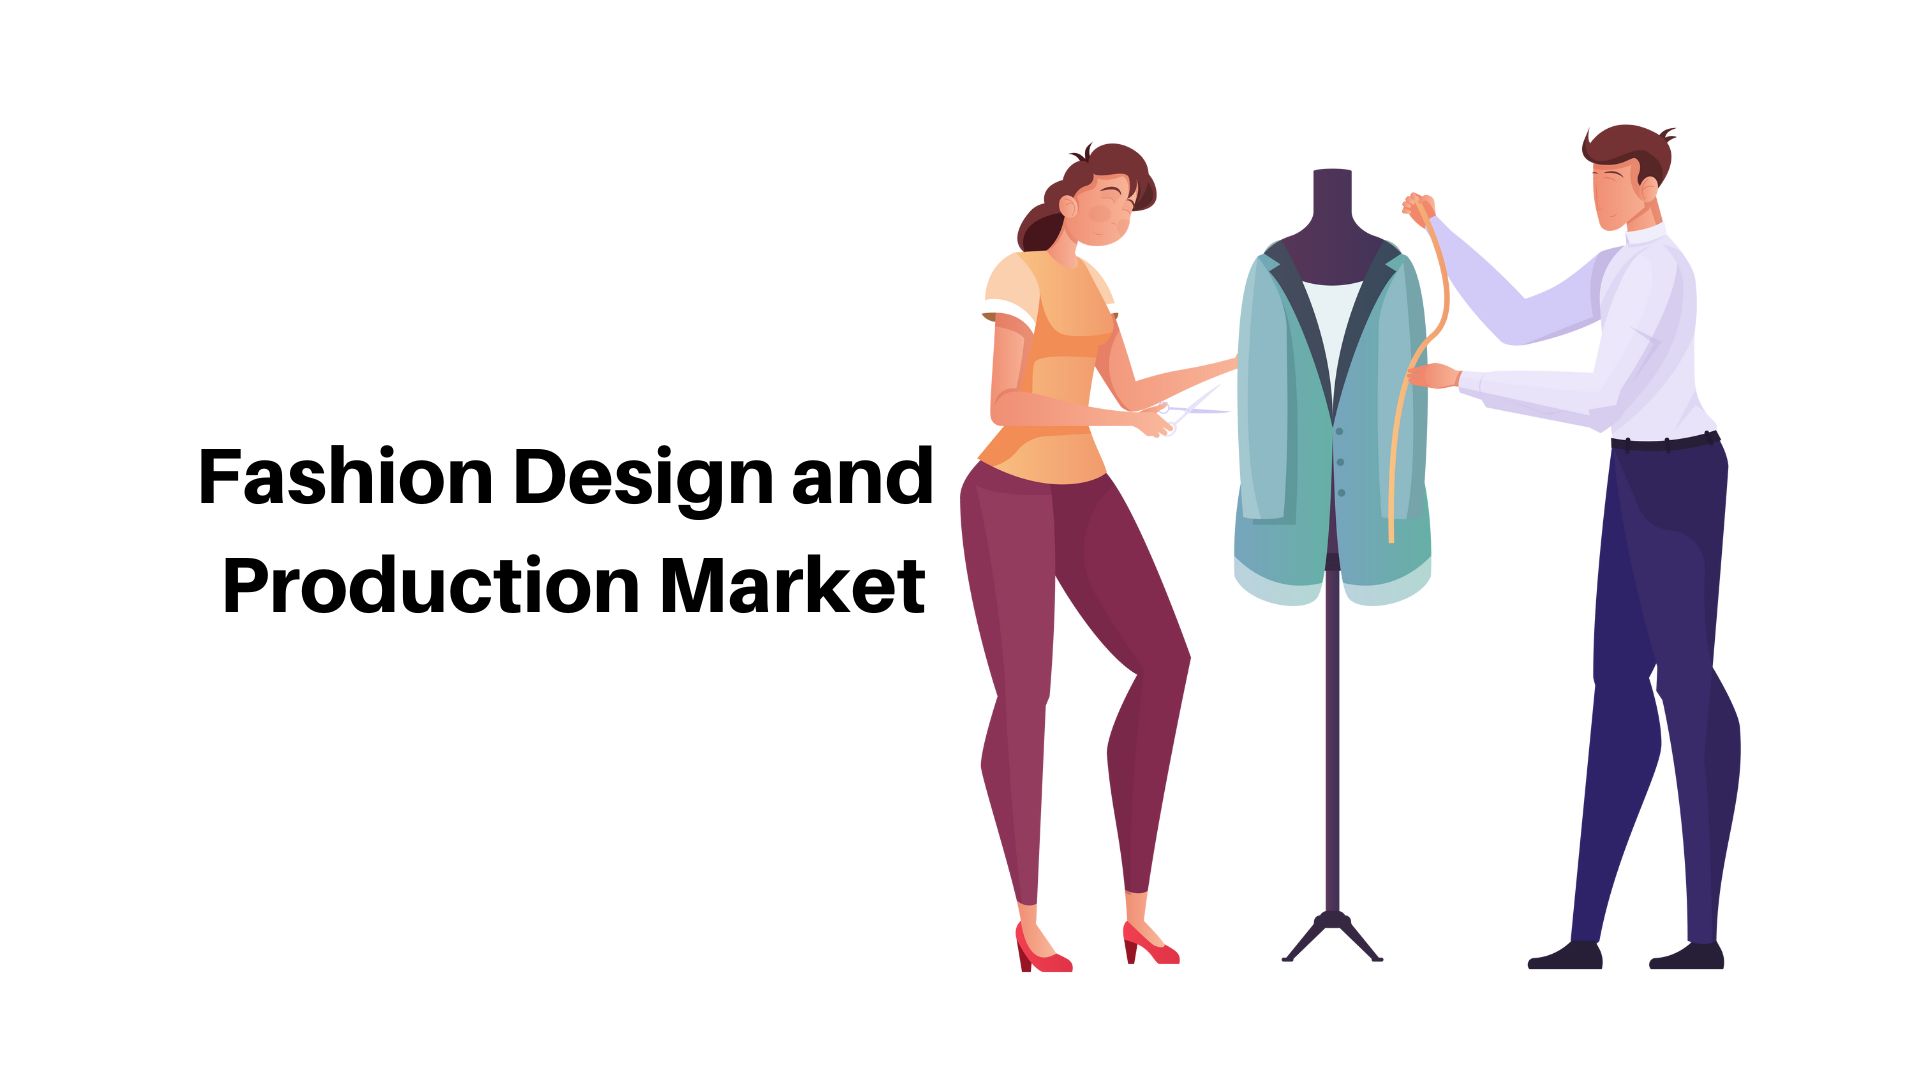 Fashion Design and Production Software Market Sales to Expand at 8.6% CAGR Through 2032